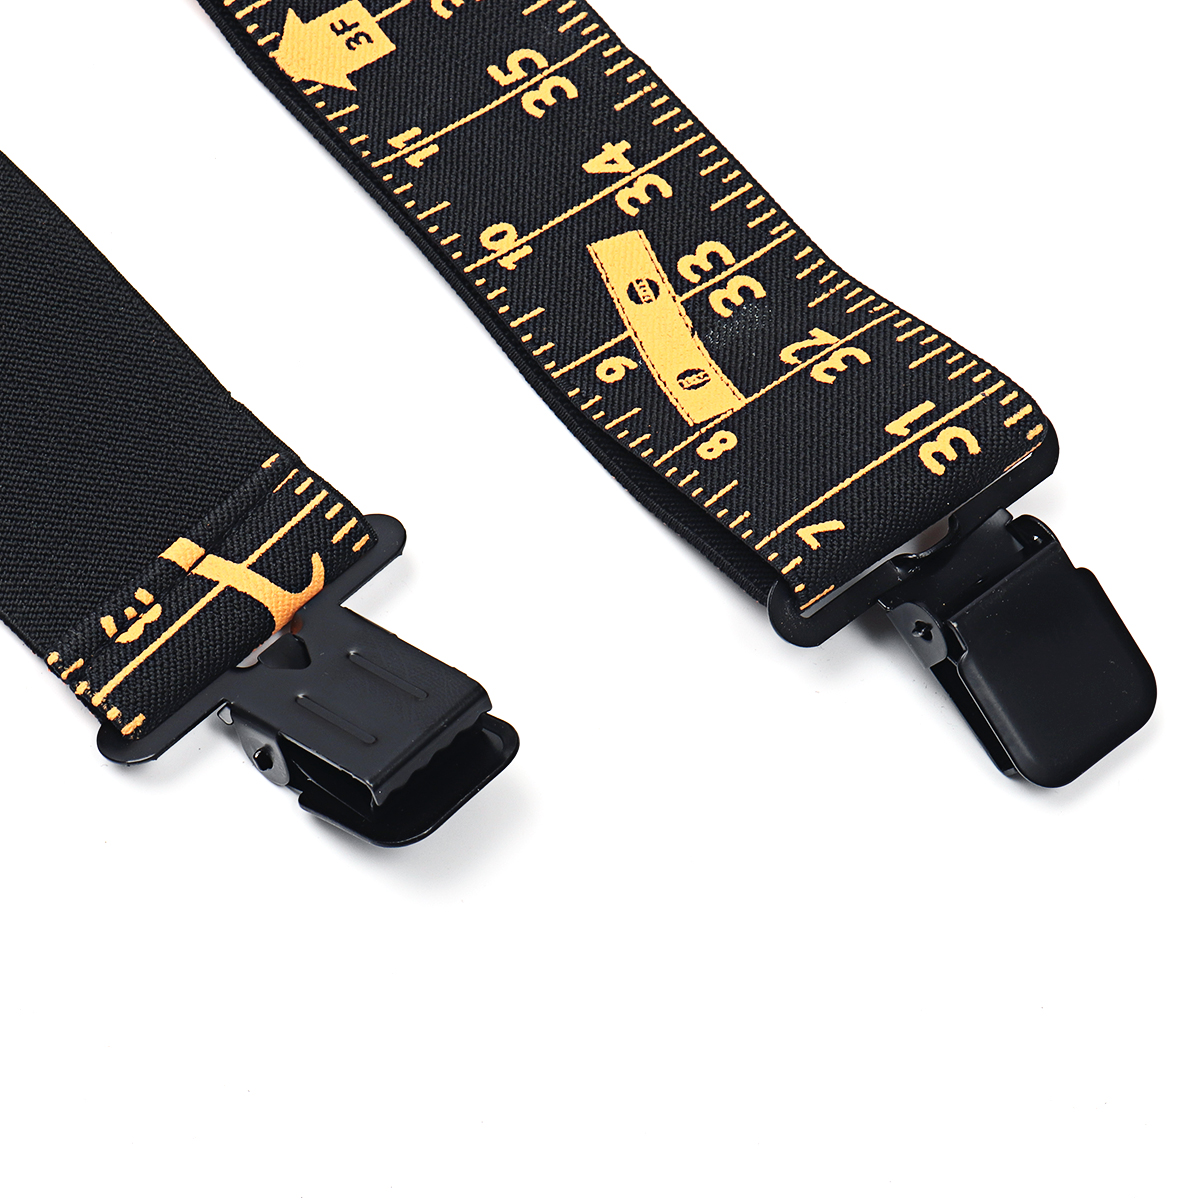 2inch-Wide-Adjustable-Ruler-Heavy-Duty-Belt-Tool-Braces-Suspender-for-Pouch-1570182-6